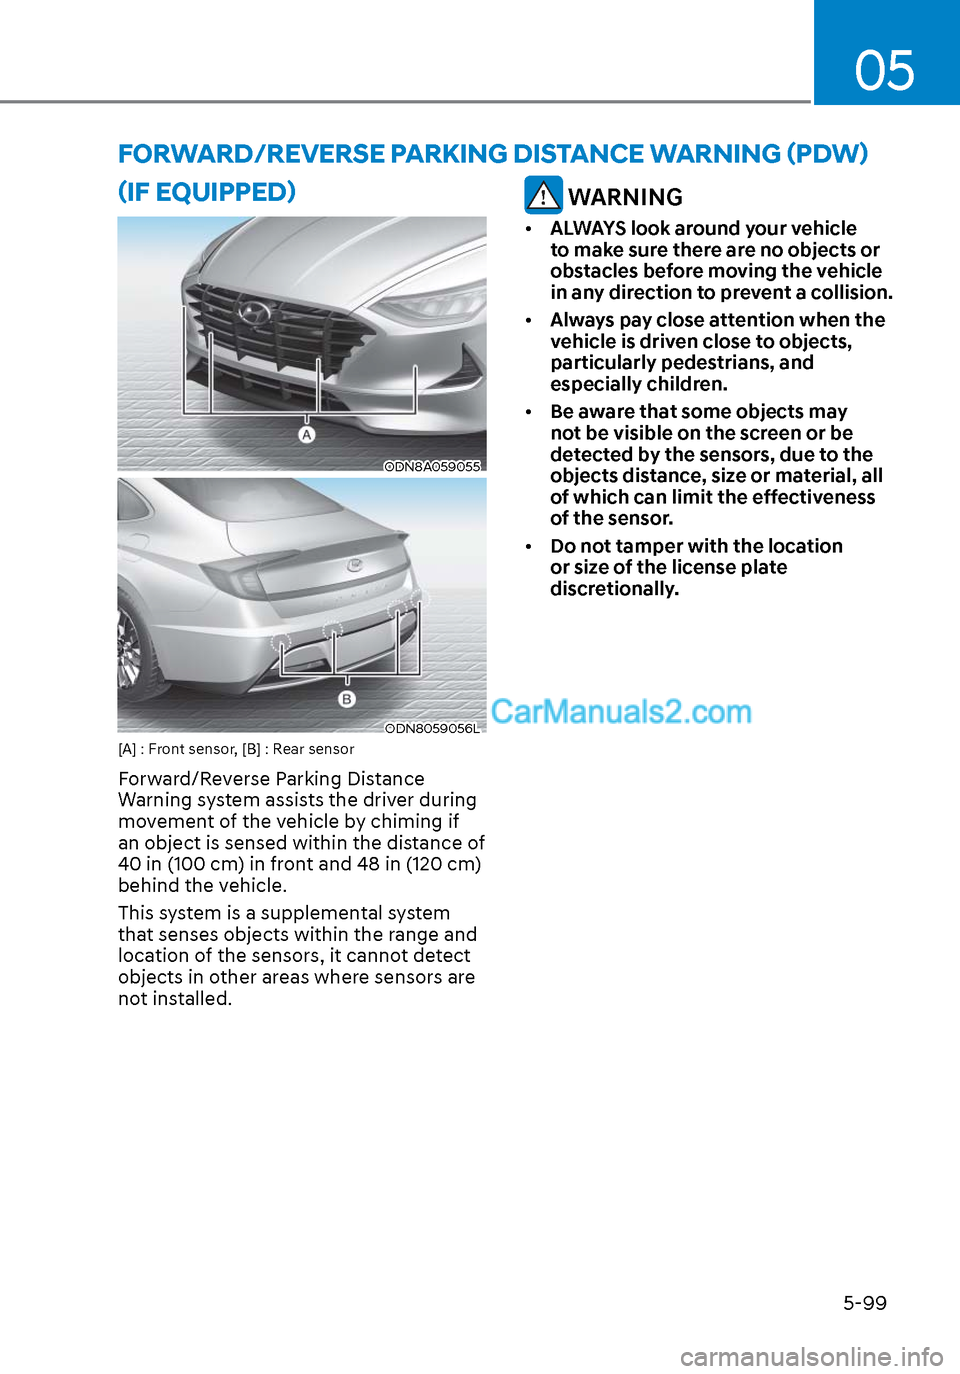 Hyundai Sonata 2020 Owners Guide 05
5-99
 FORWARD/REVERSE PARKING DISTANCE WARNING (PDW) 
(IF EQUIPPED)
ODN8A059055ODN8A059055
ODN8059056LODN8059056L[A] : Front sensor, [B] : Rear sensor
Forward/Reverse Parking Distance 
Warning syst